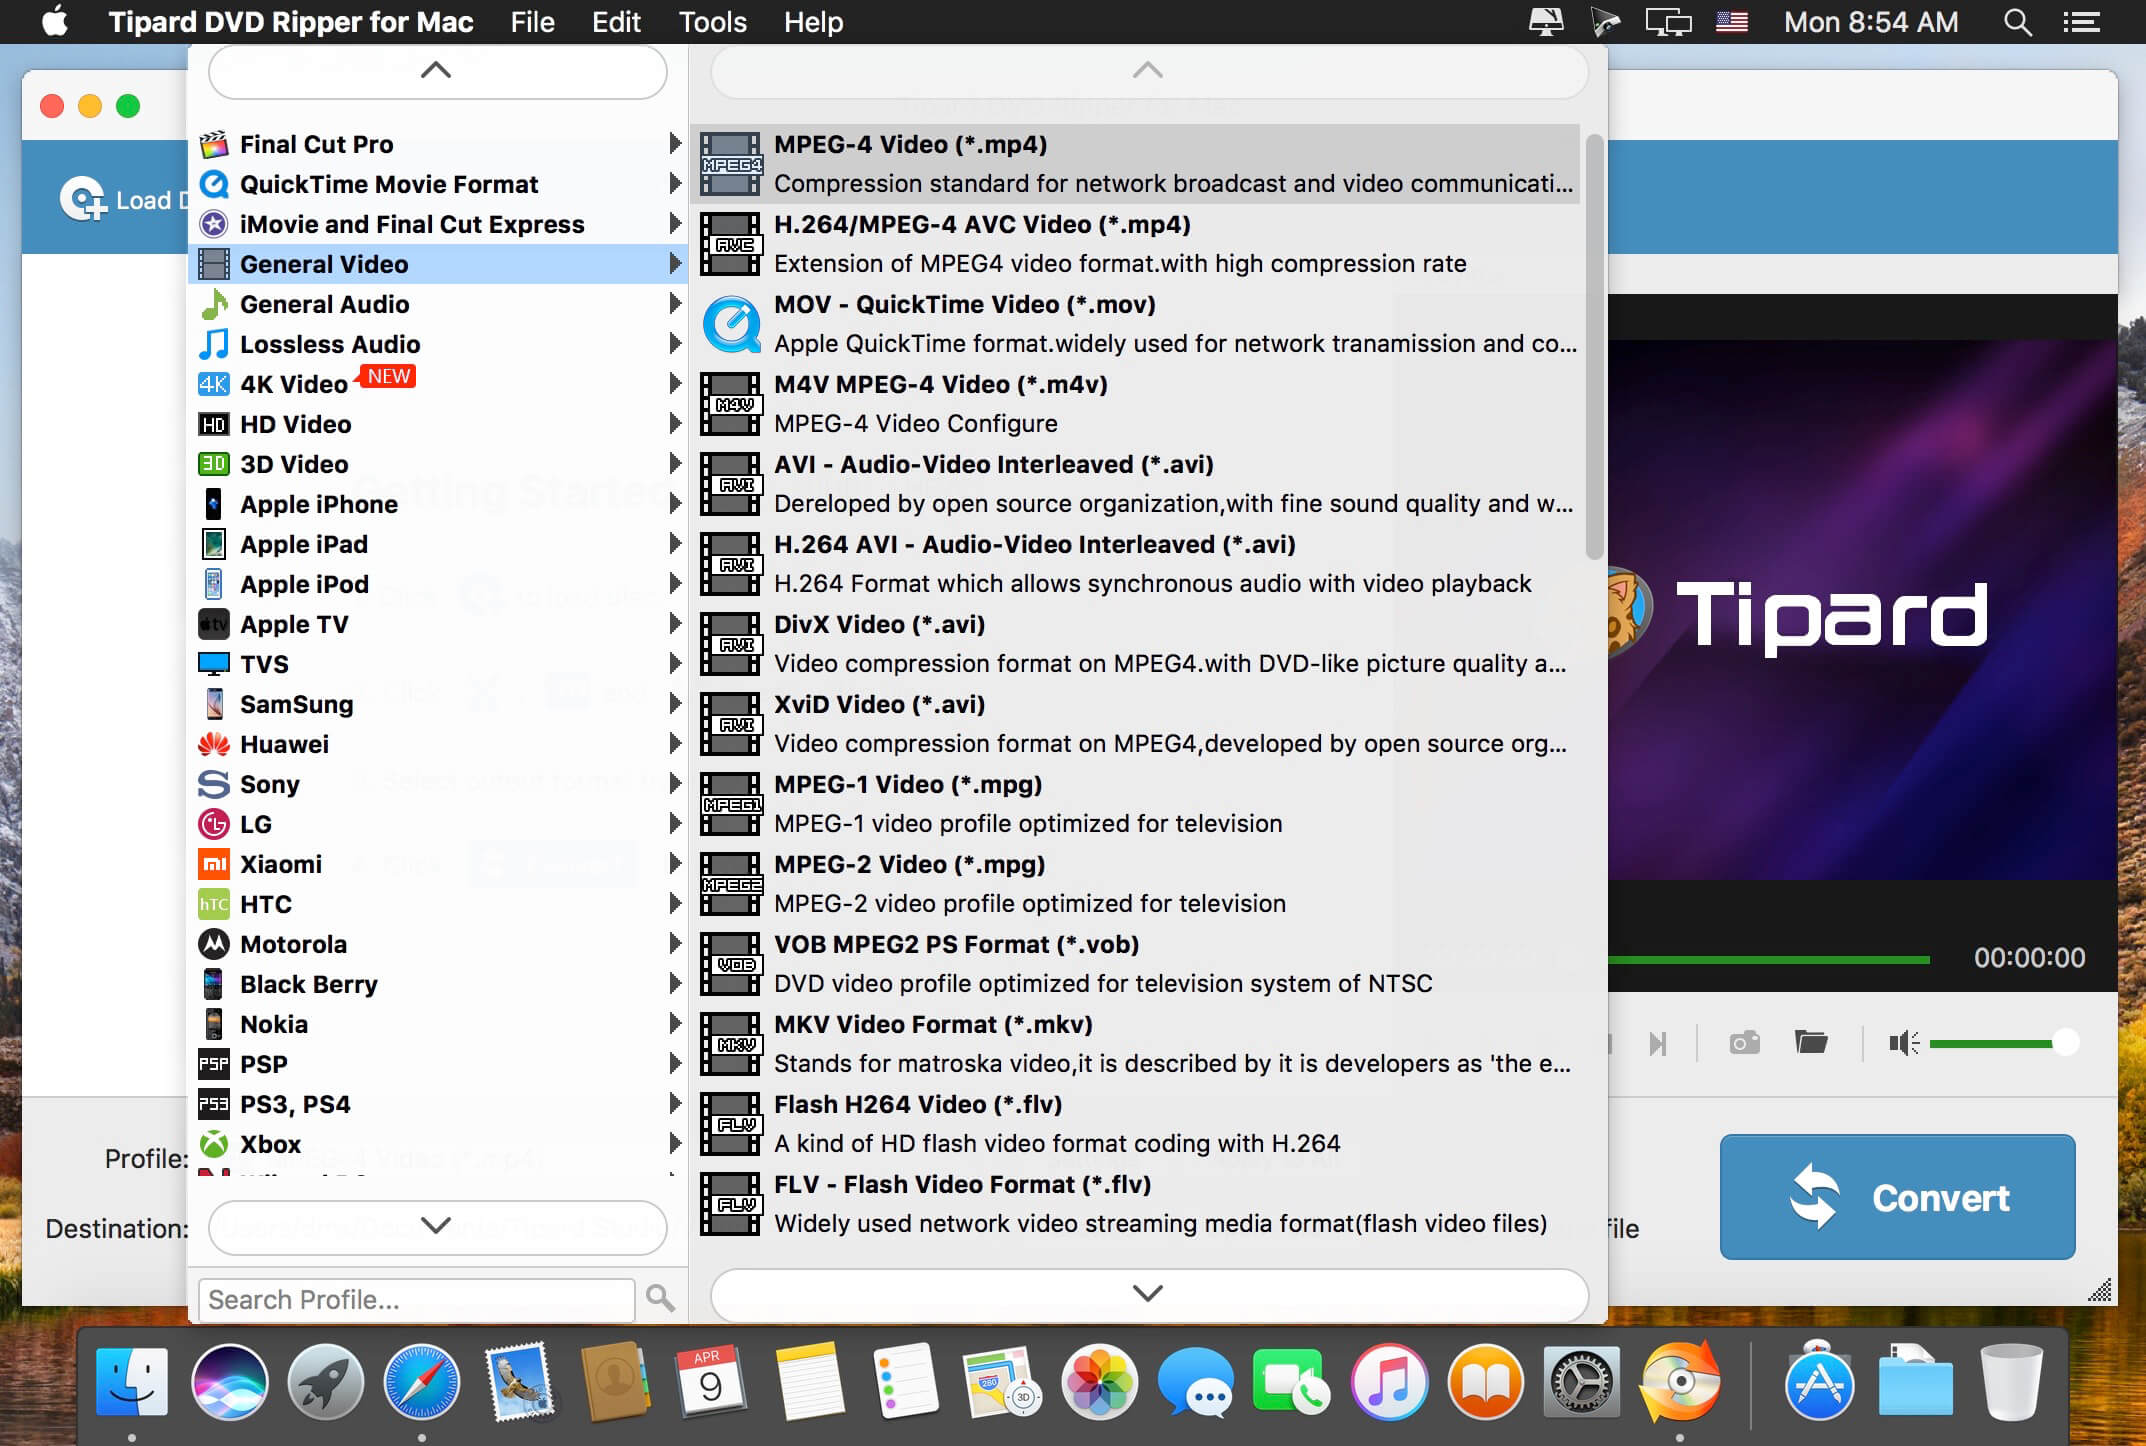 dvd ripping software for mac os x